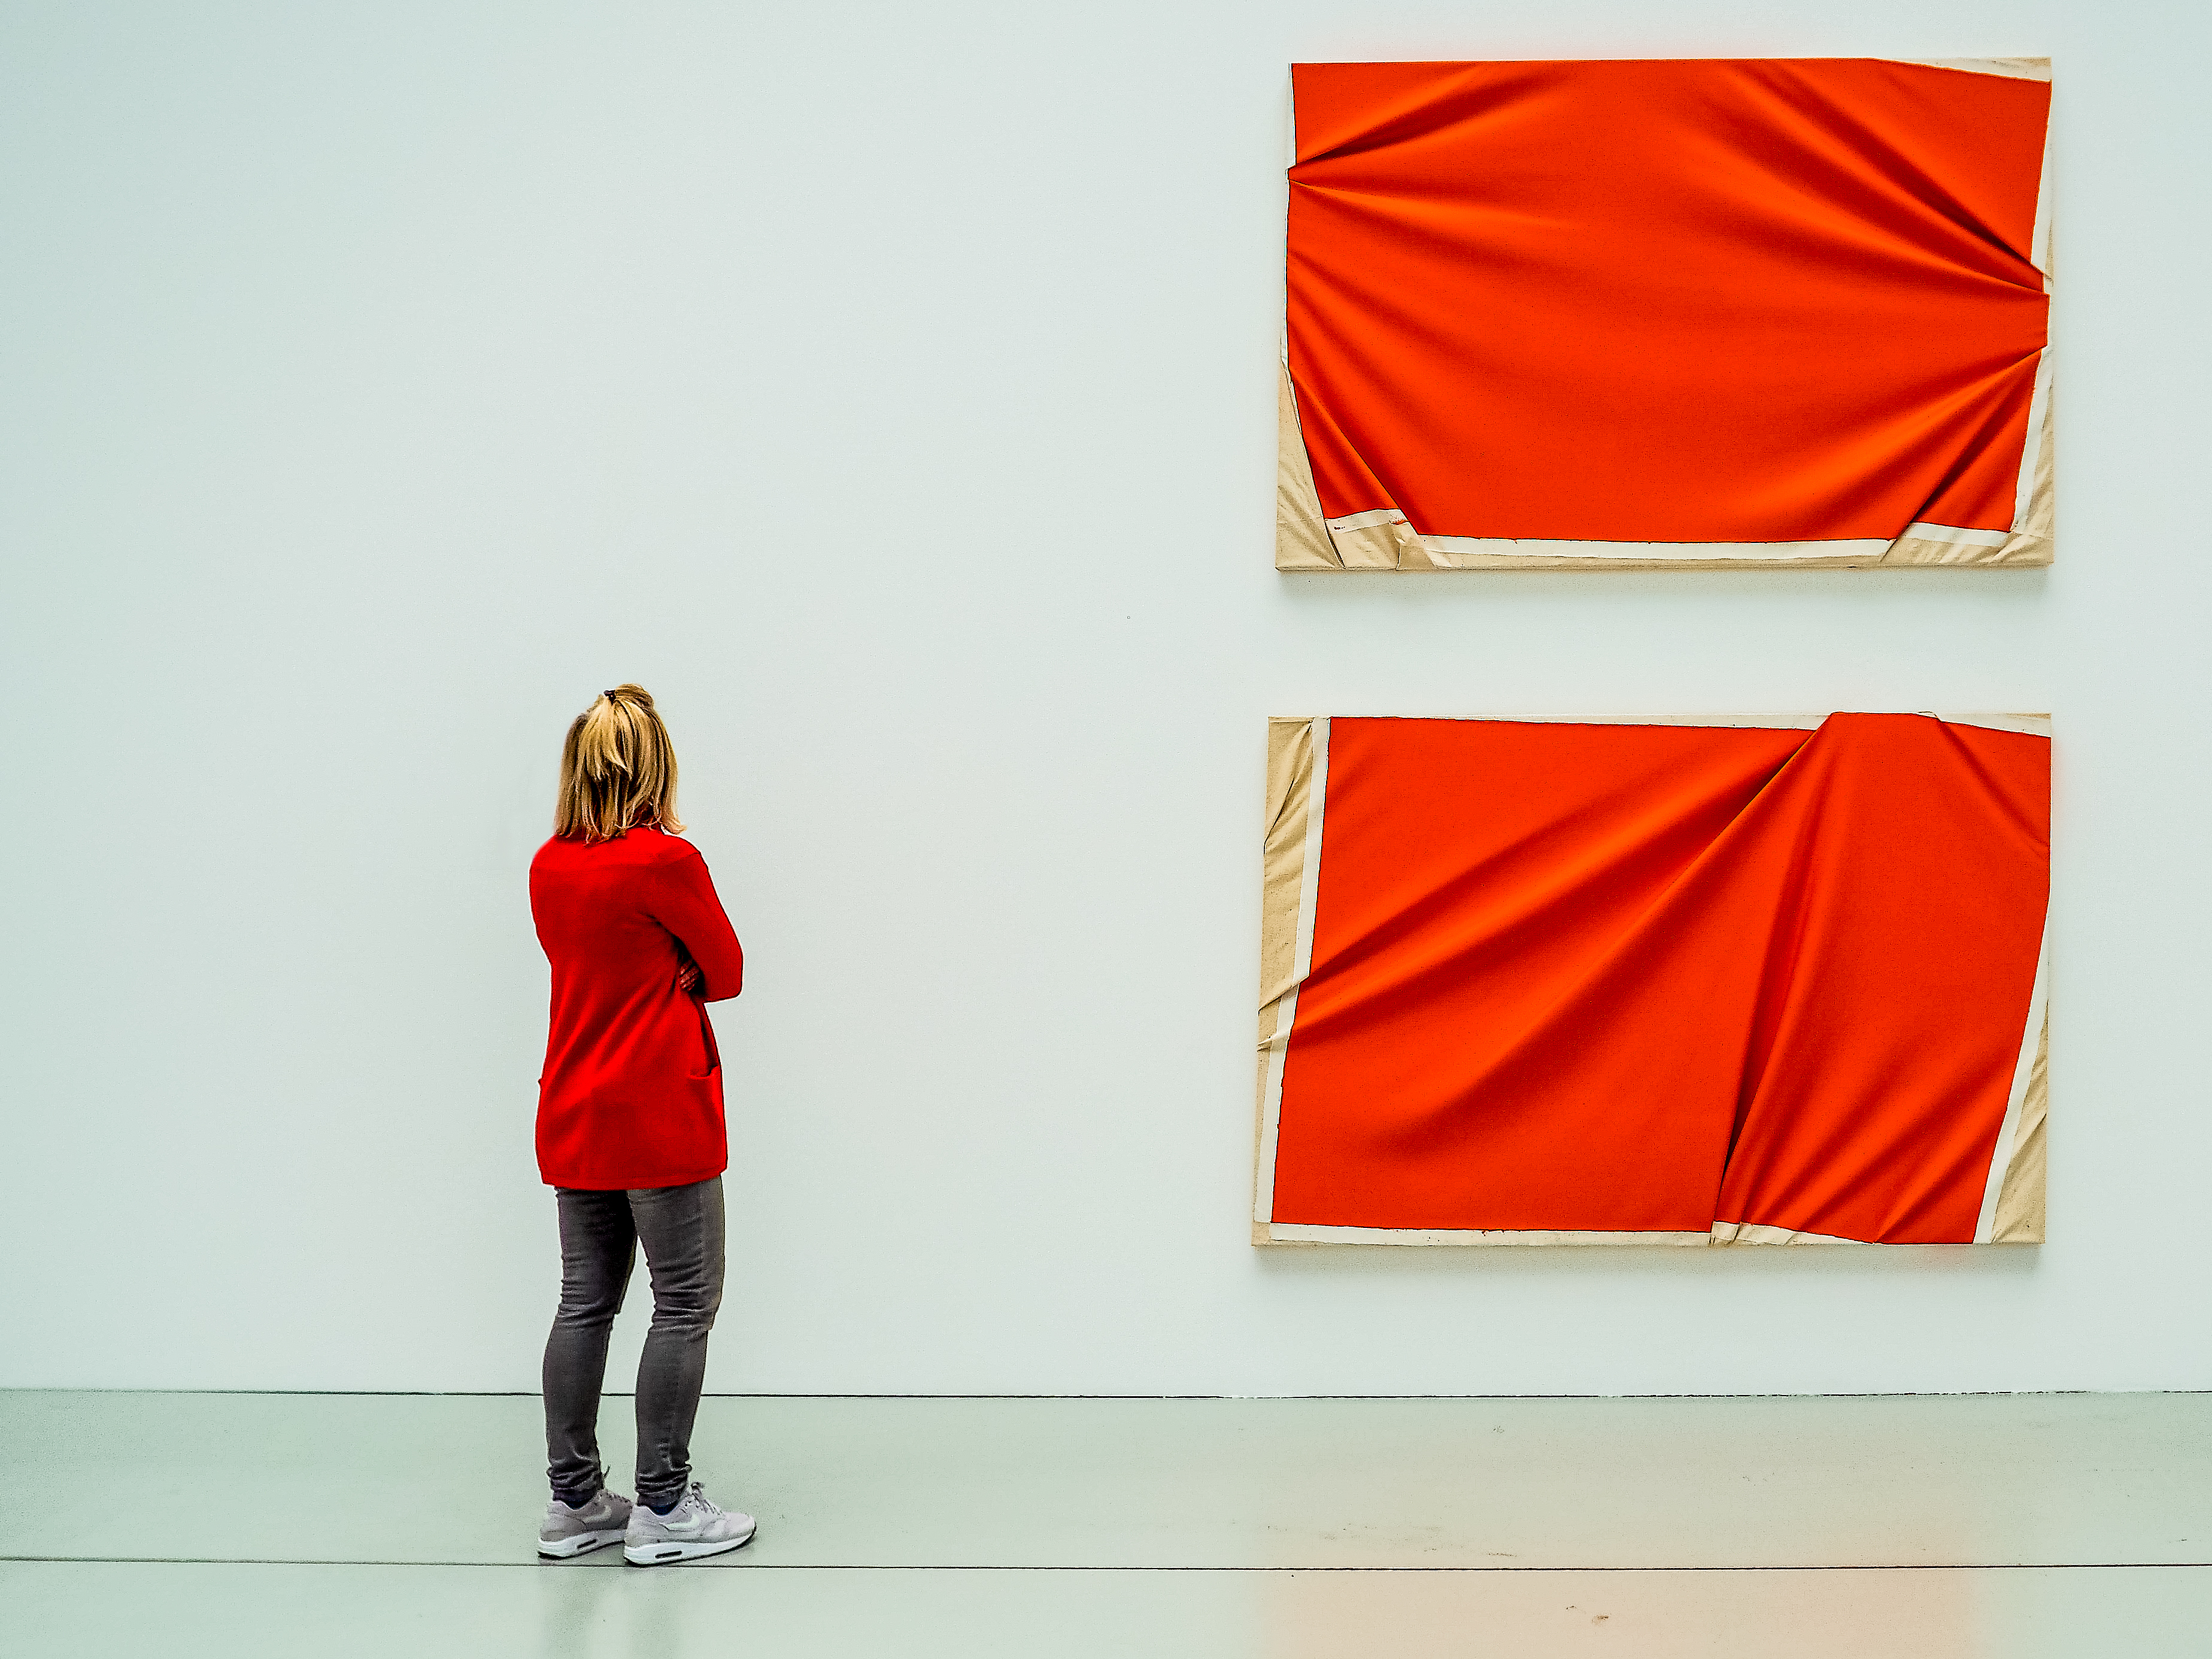 A woman views a brightly coloured work of art that matches her outfit in this image captured by Hans Lahodny from Austria